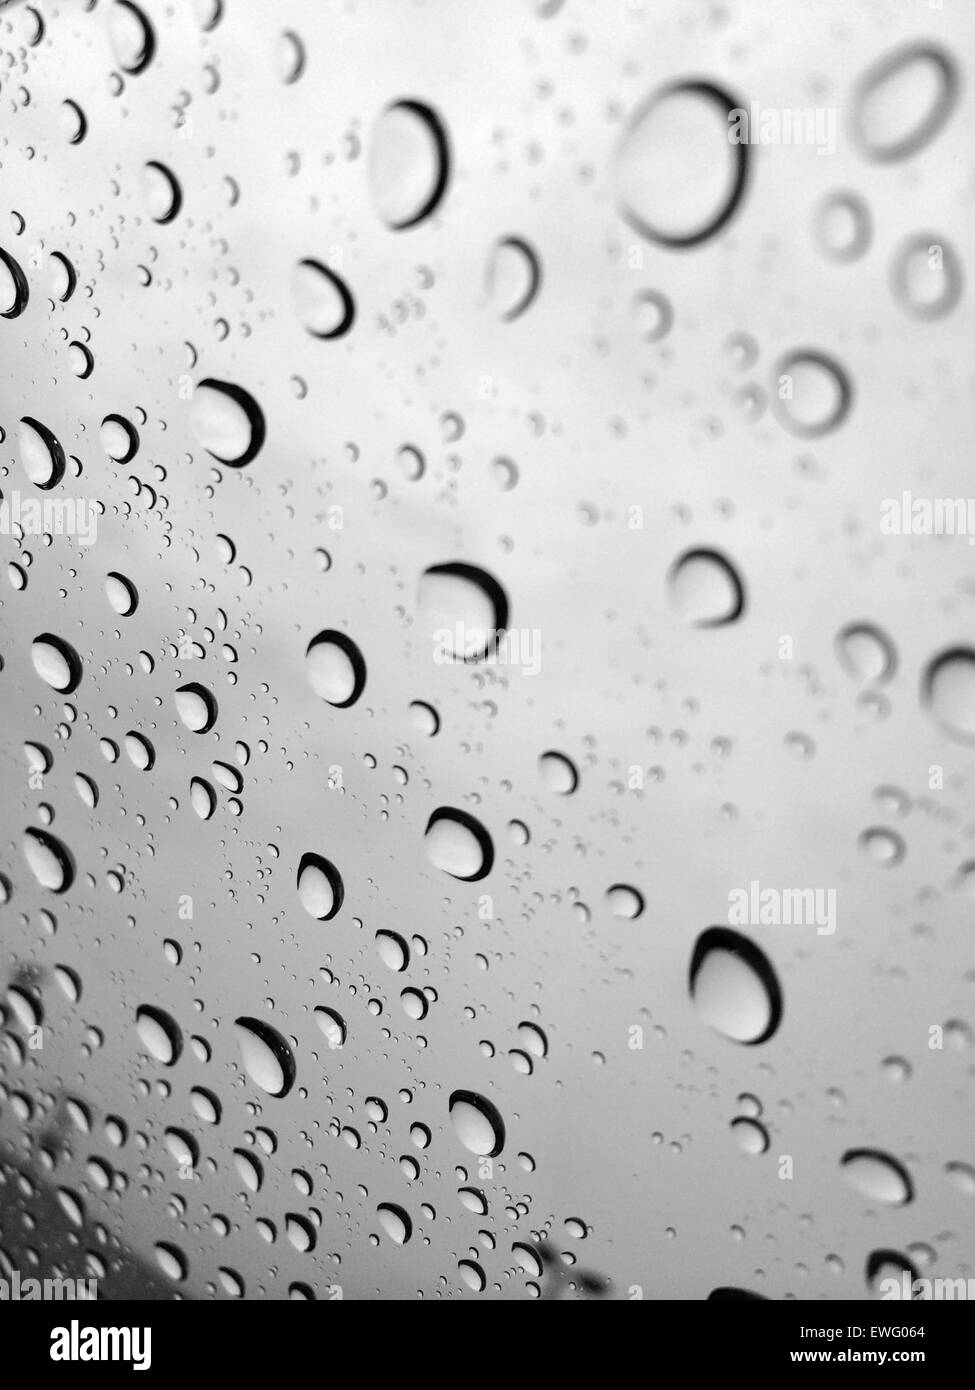 Water Droplets Pattern Stock Photo